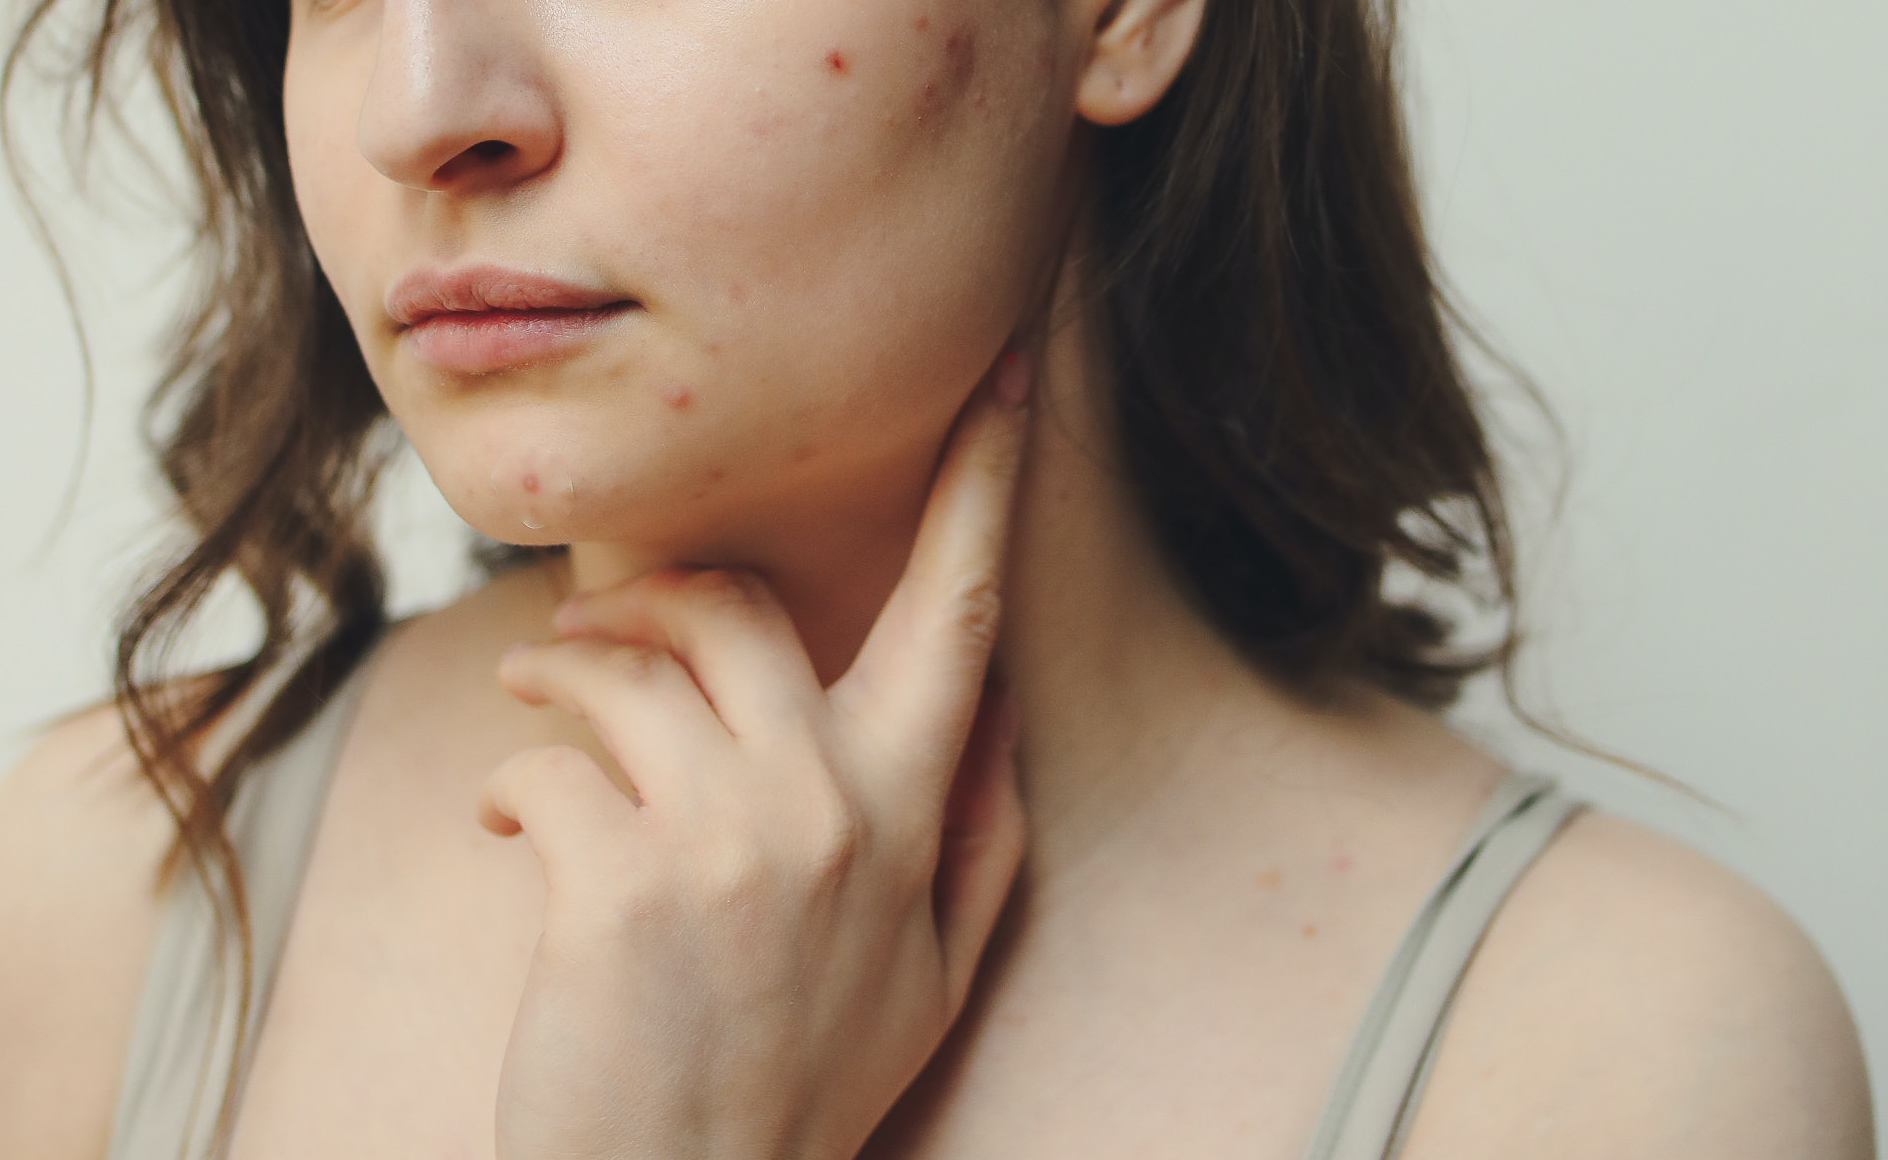 Essential tips on how to take care of acne-prone skin